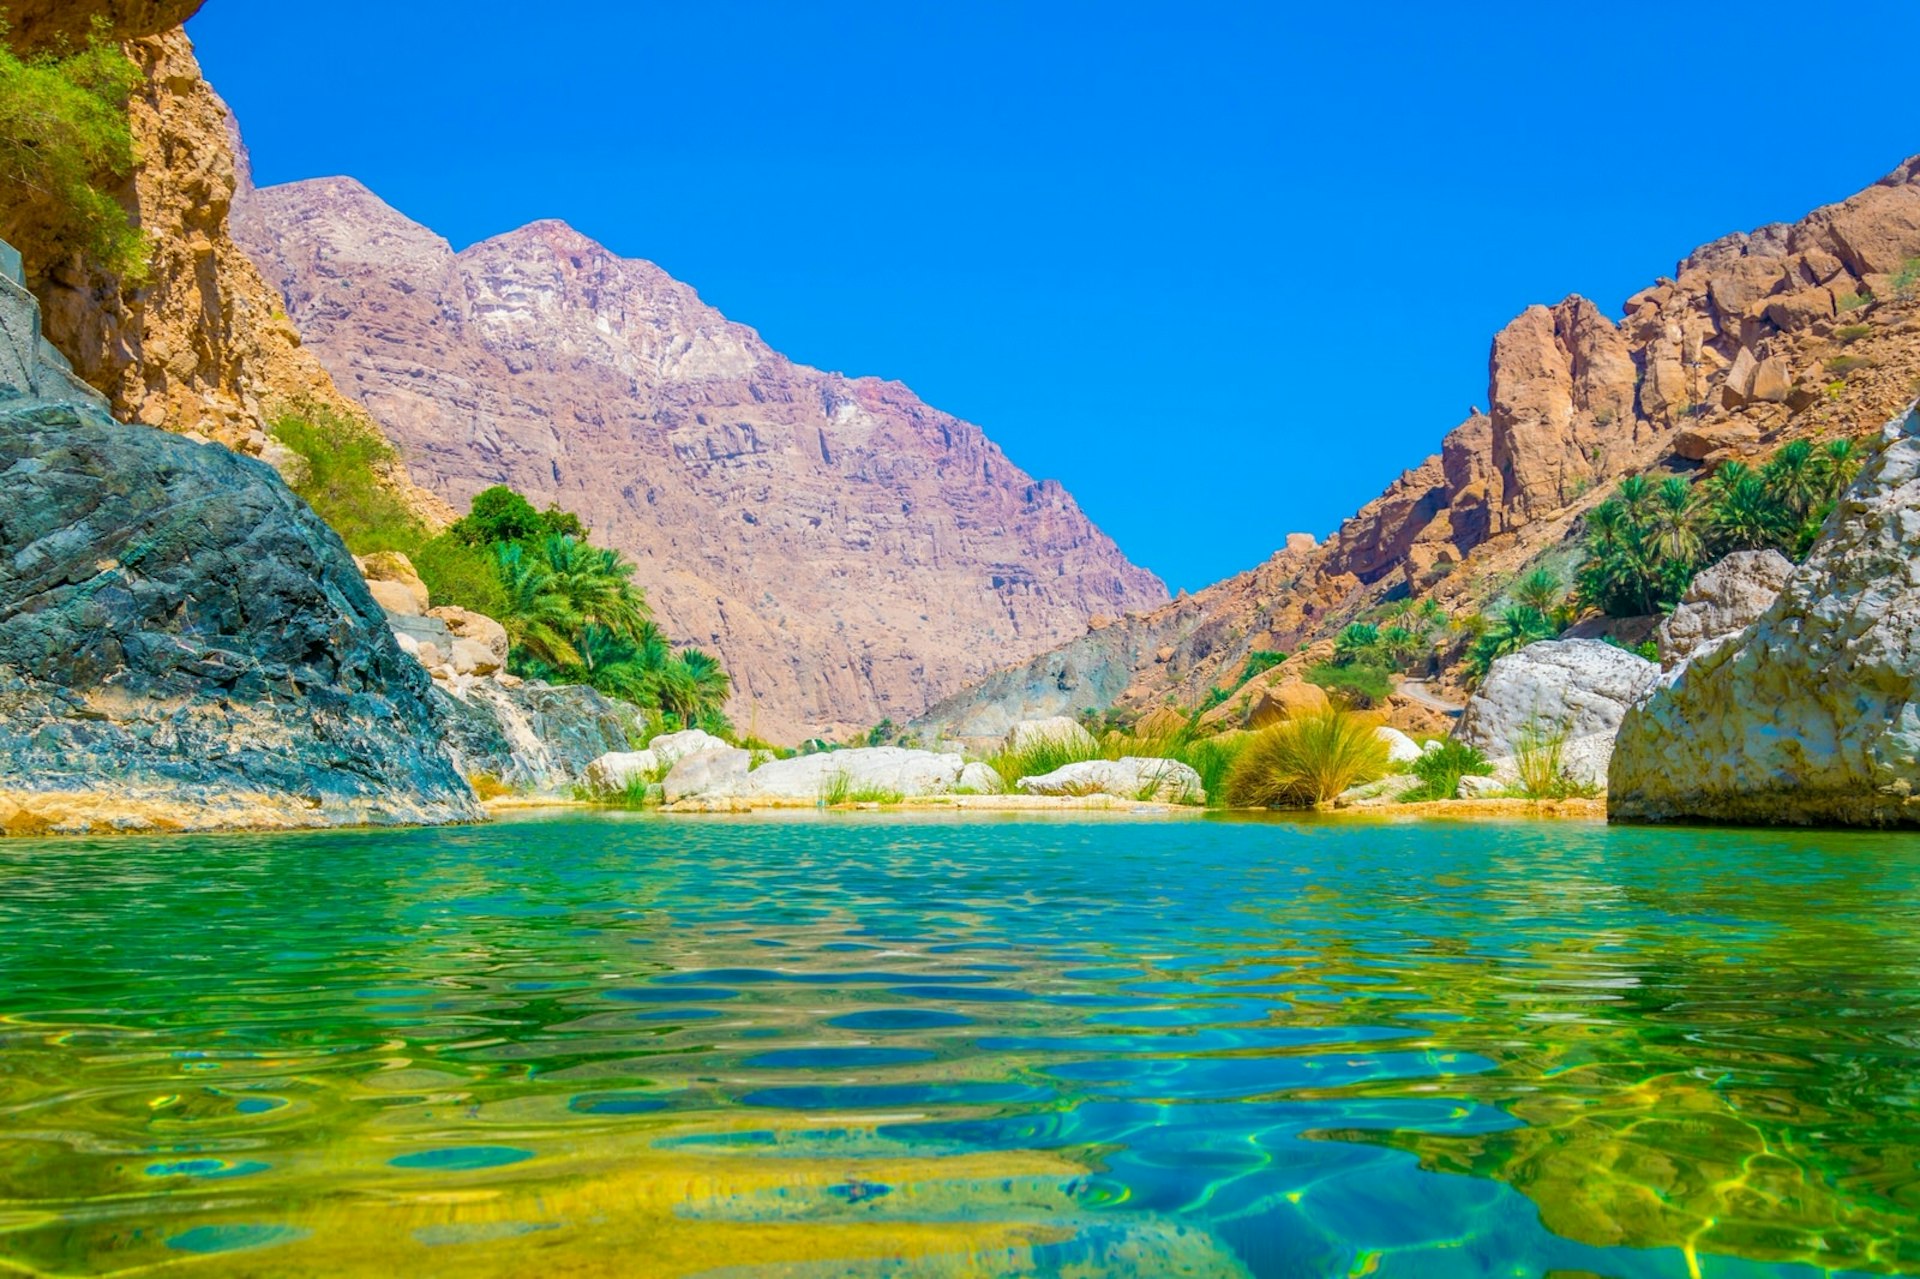 Lagoon with turquoise water in Wadi Tiwi, Oman. Image by trabantos / Shutterstock